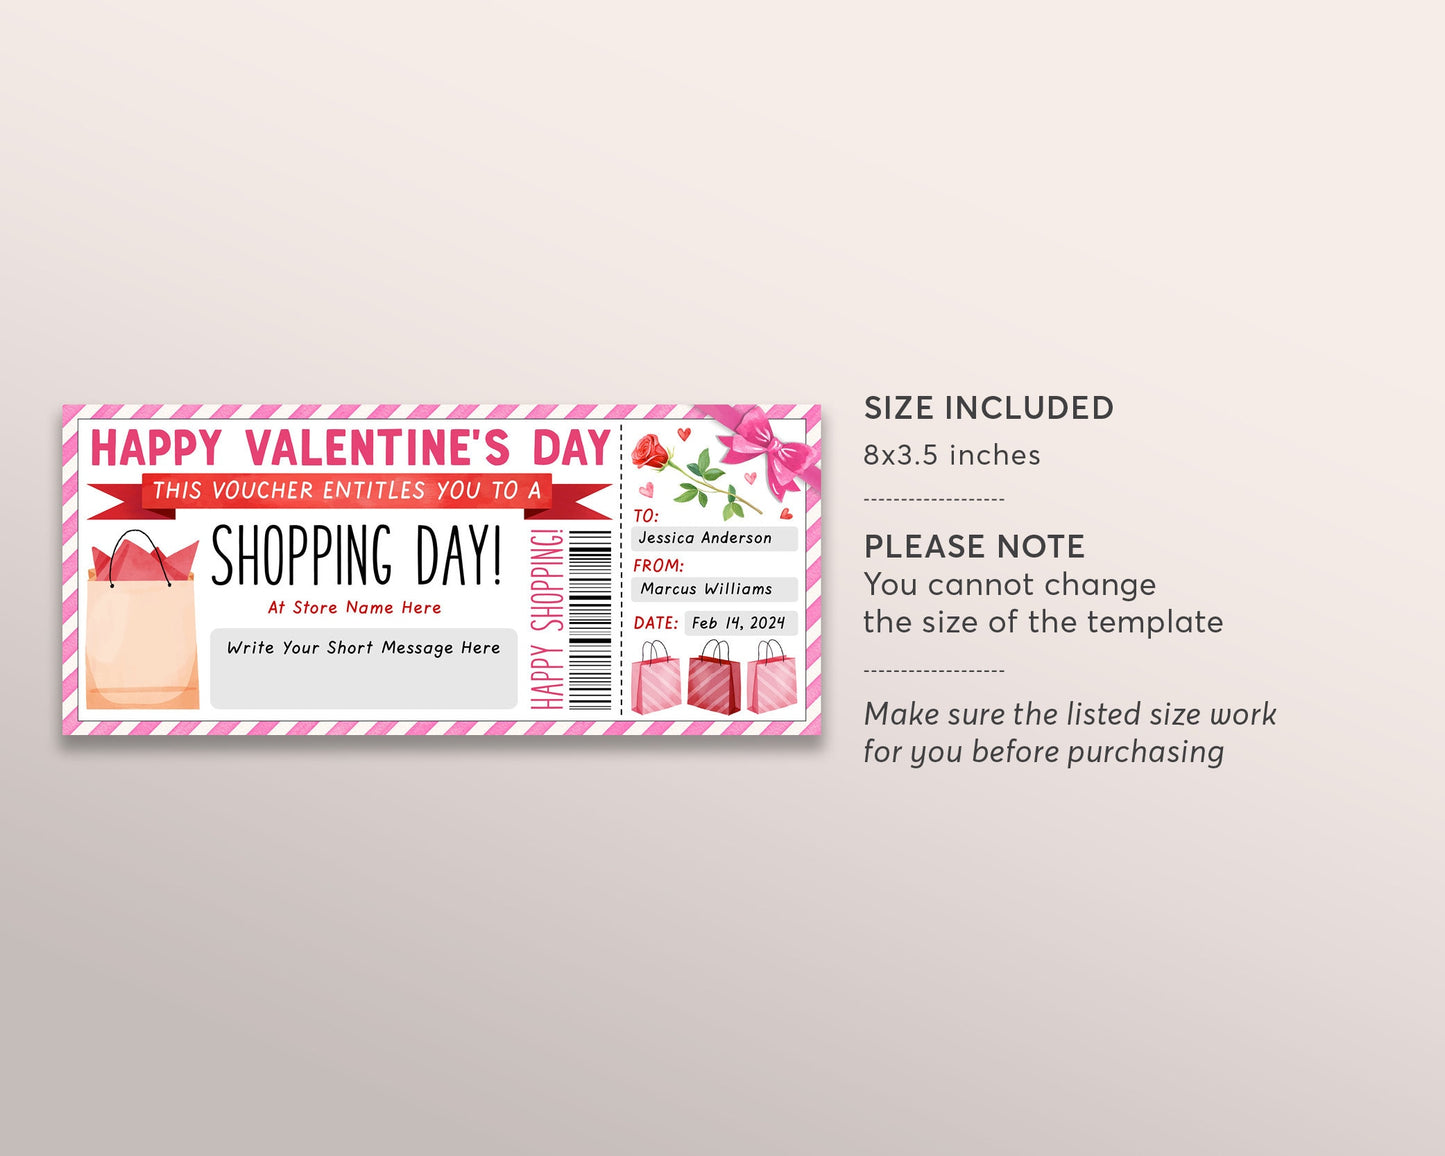 Valentine's Day Shopping Spree Gift Certificate Editable Template, Anniversary Surprise Shopping Day Trip Voucher Ticket For Girlfriend Wife